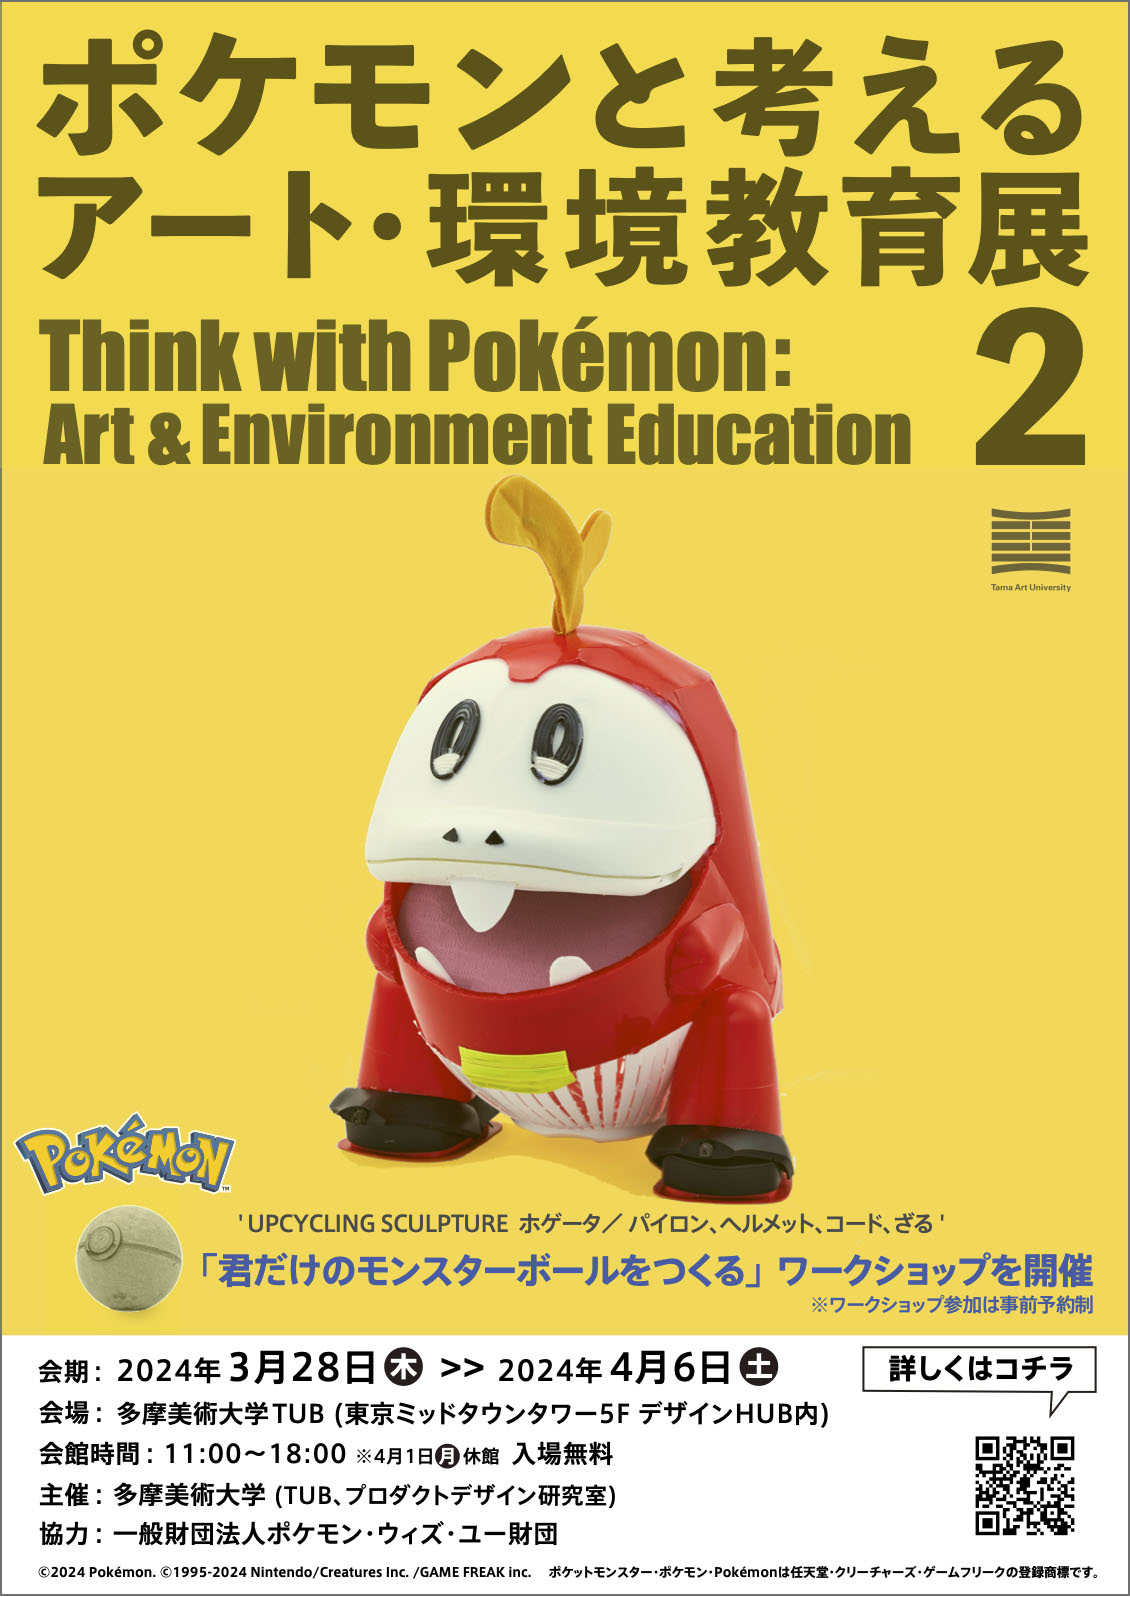 Think with Pokemon art exhibit 2 upcycling sculpture - Fuecoco